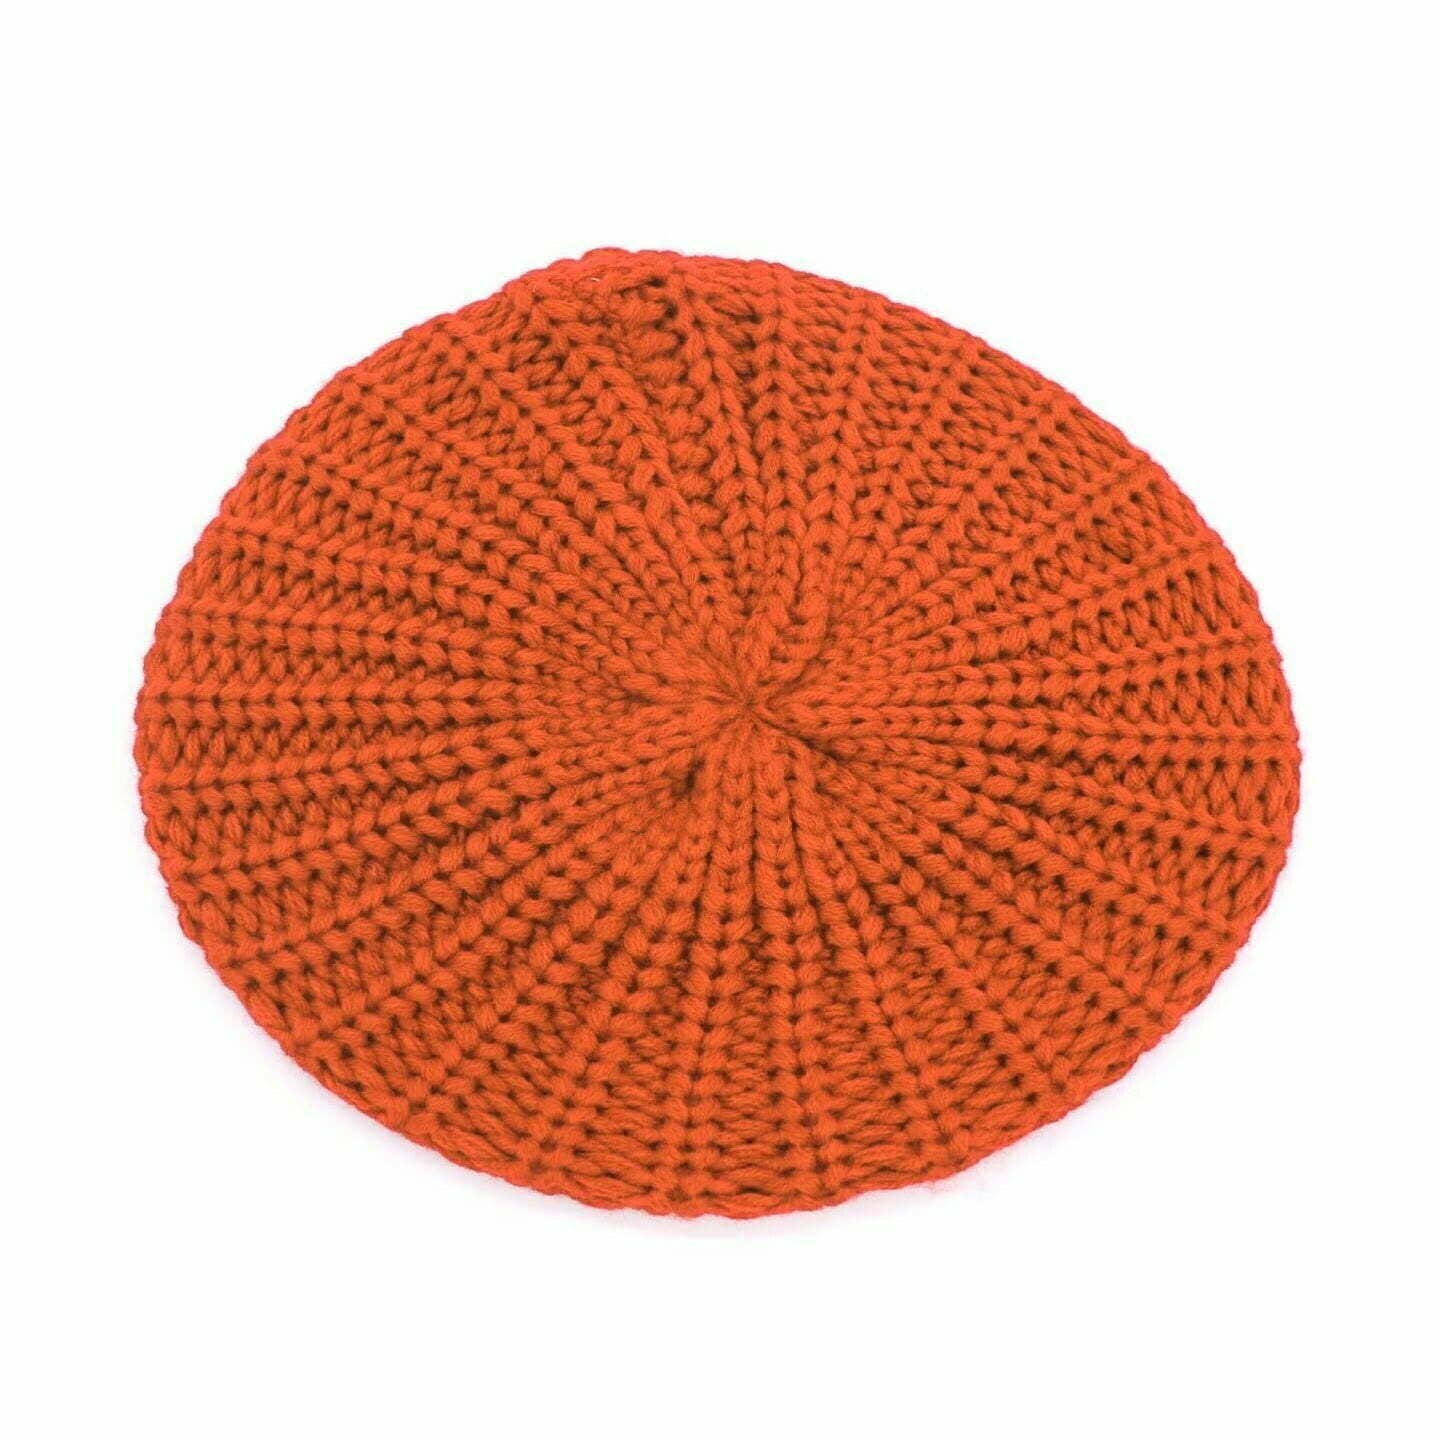 Diacly - Solid Color Knit Crochet French Beret